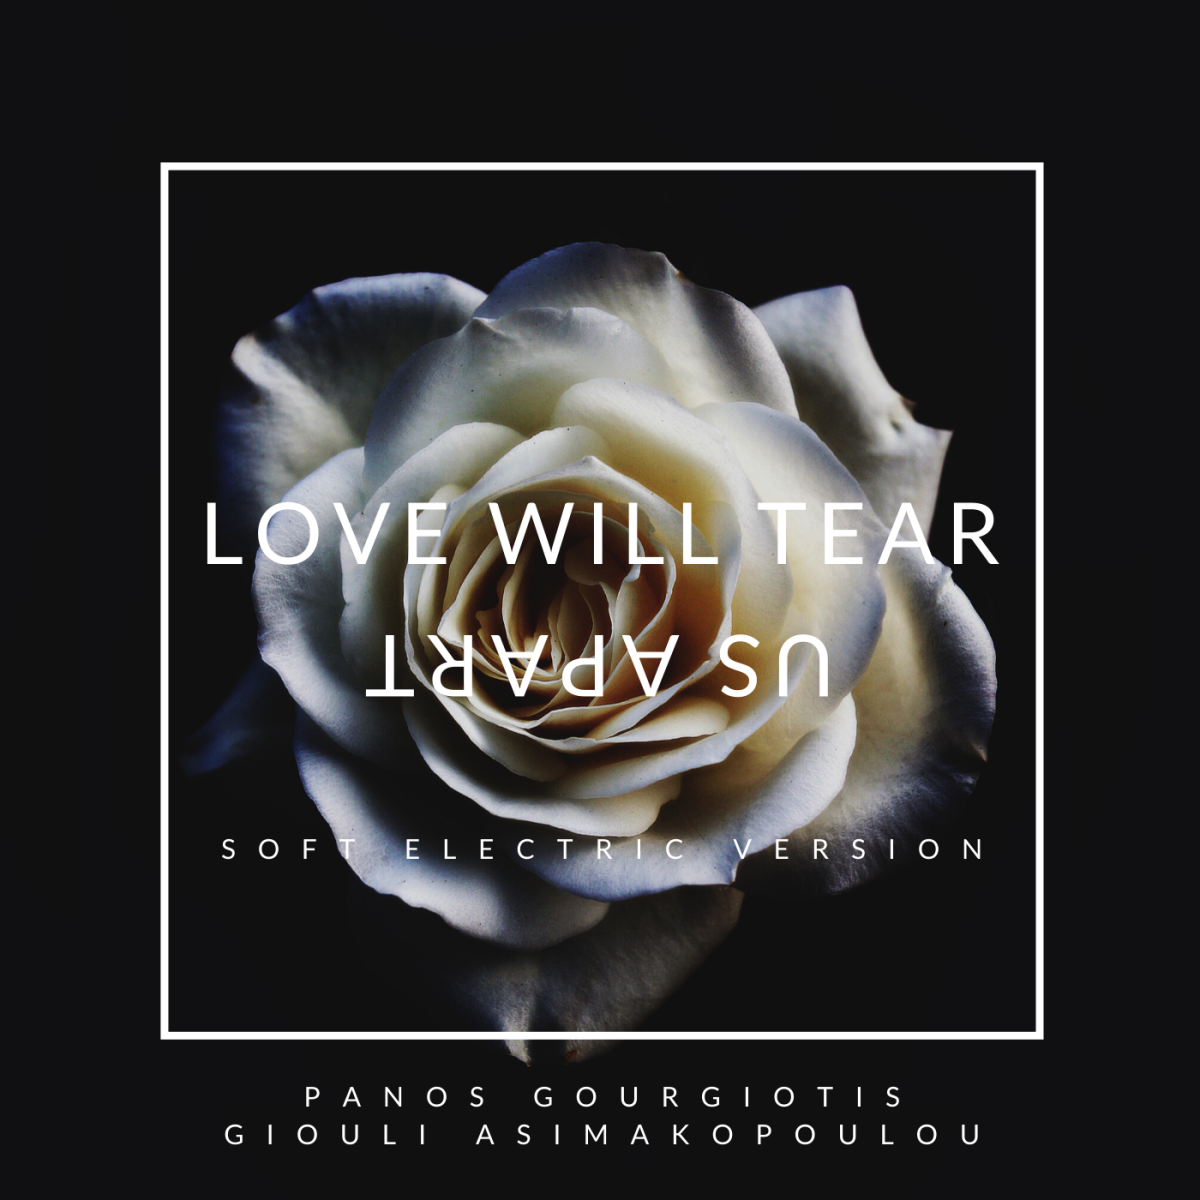 LOVE WILL TEAR US APART - SINGLE COVER